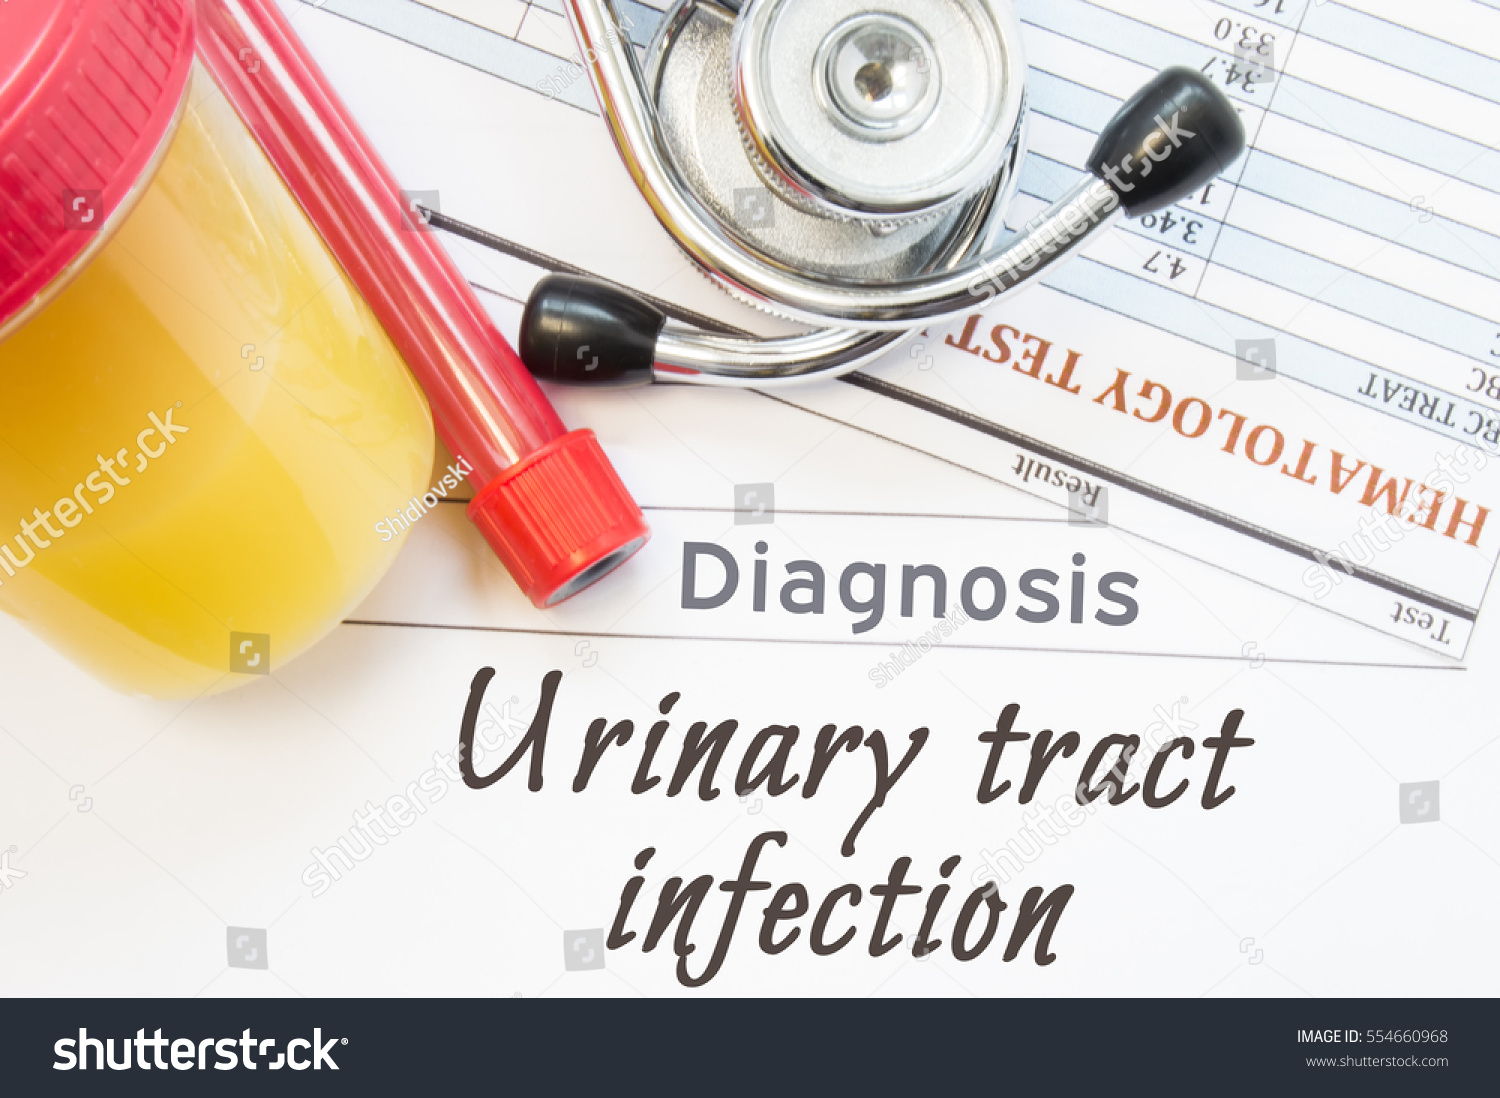 Urinary tract infection diagnosis. Lab container with urine sample, test tube with blood, stethoscope and blood test results on white note inscribed with  urologic disease Urinary tract infection #554660968